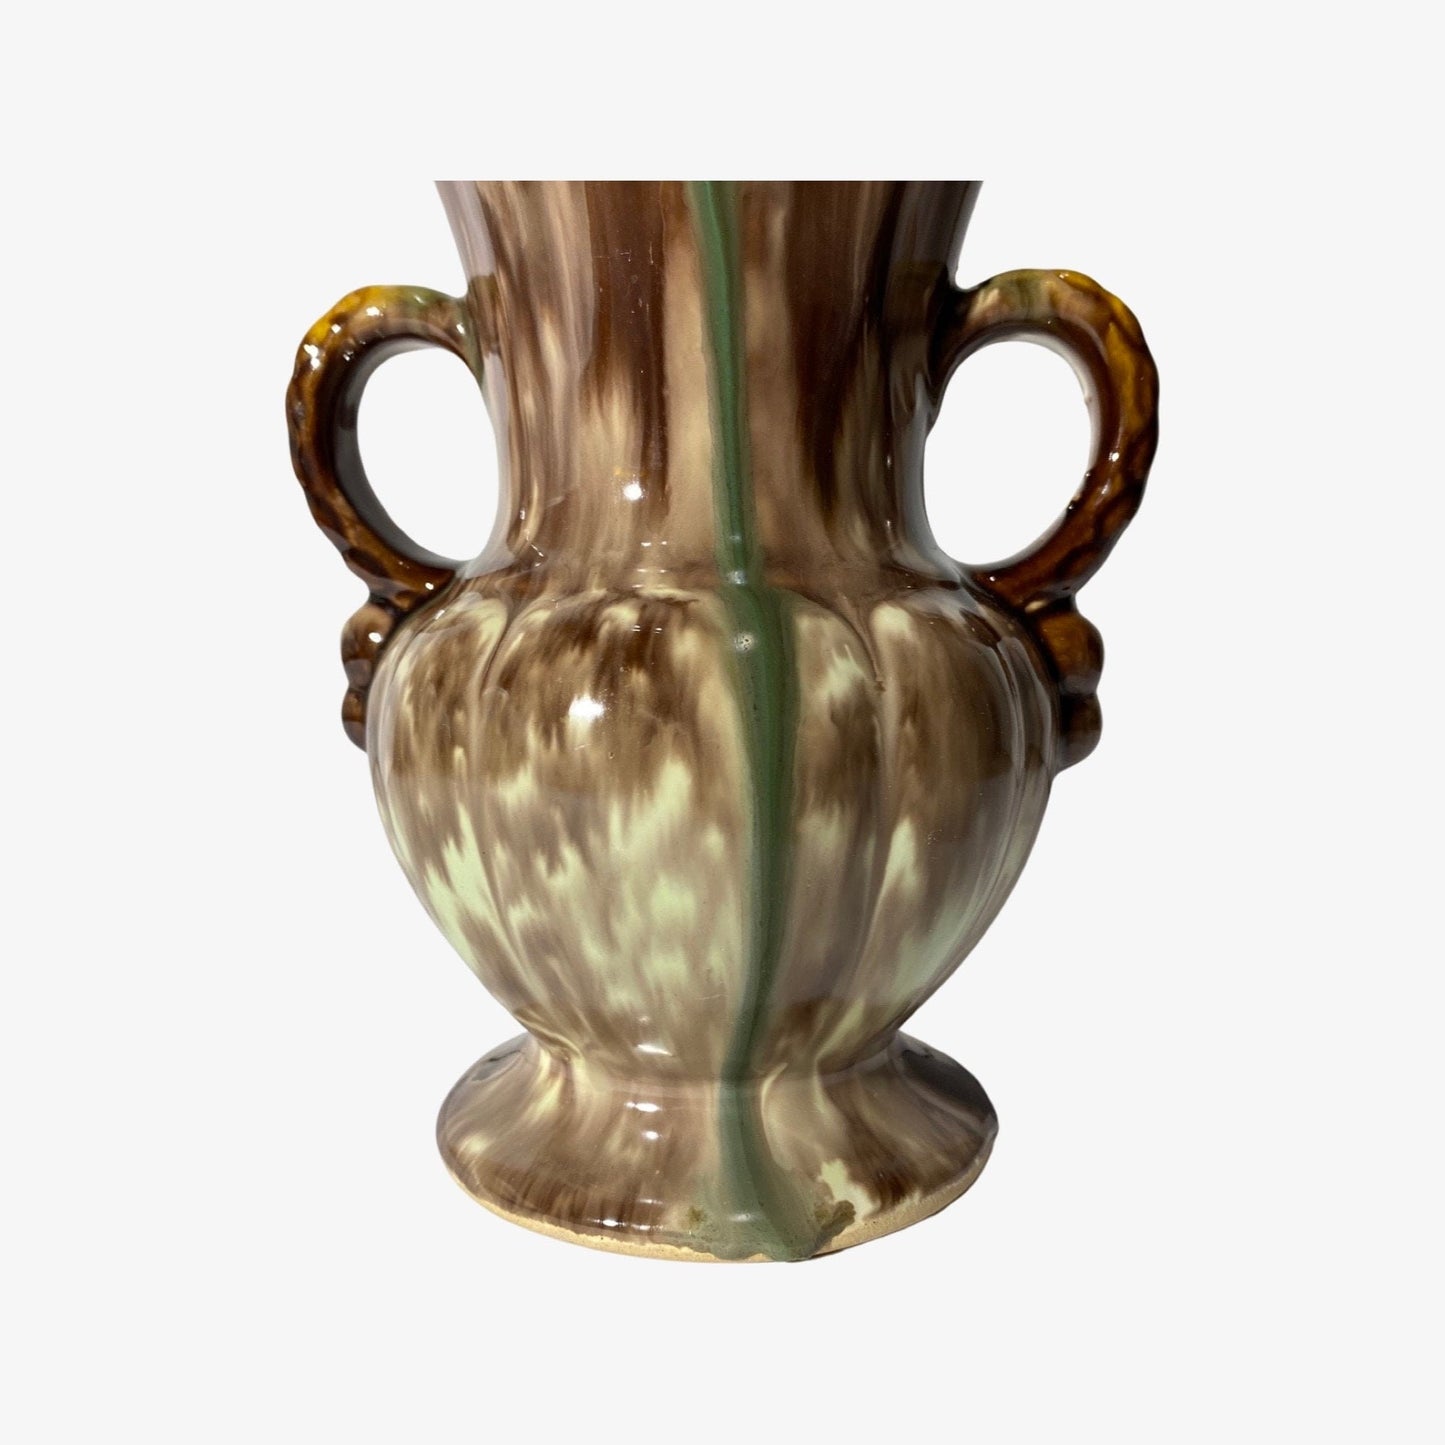 60s German Vase With Brown/Green Colors | Handmade Ceramic Planter Vase From Europe | Height: 6.3'' / 16 cm